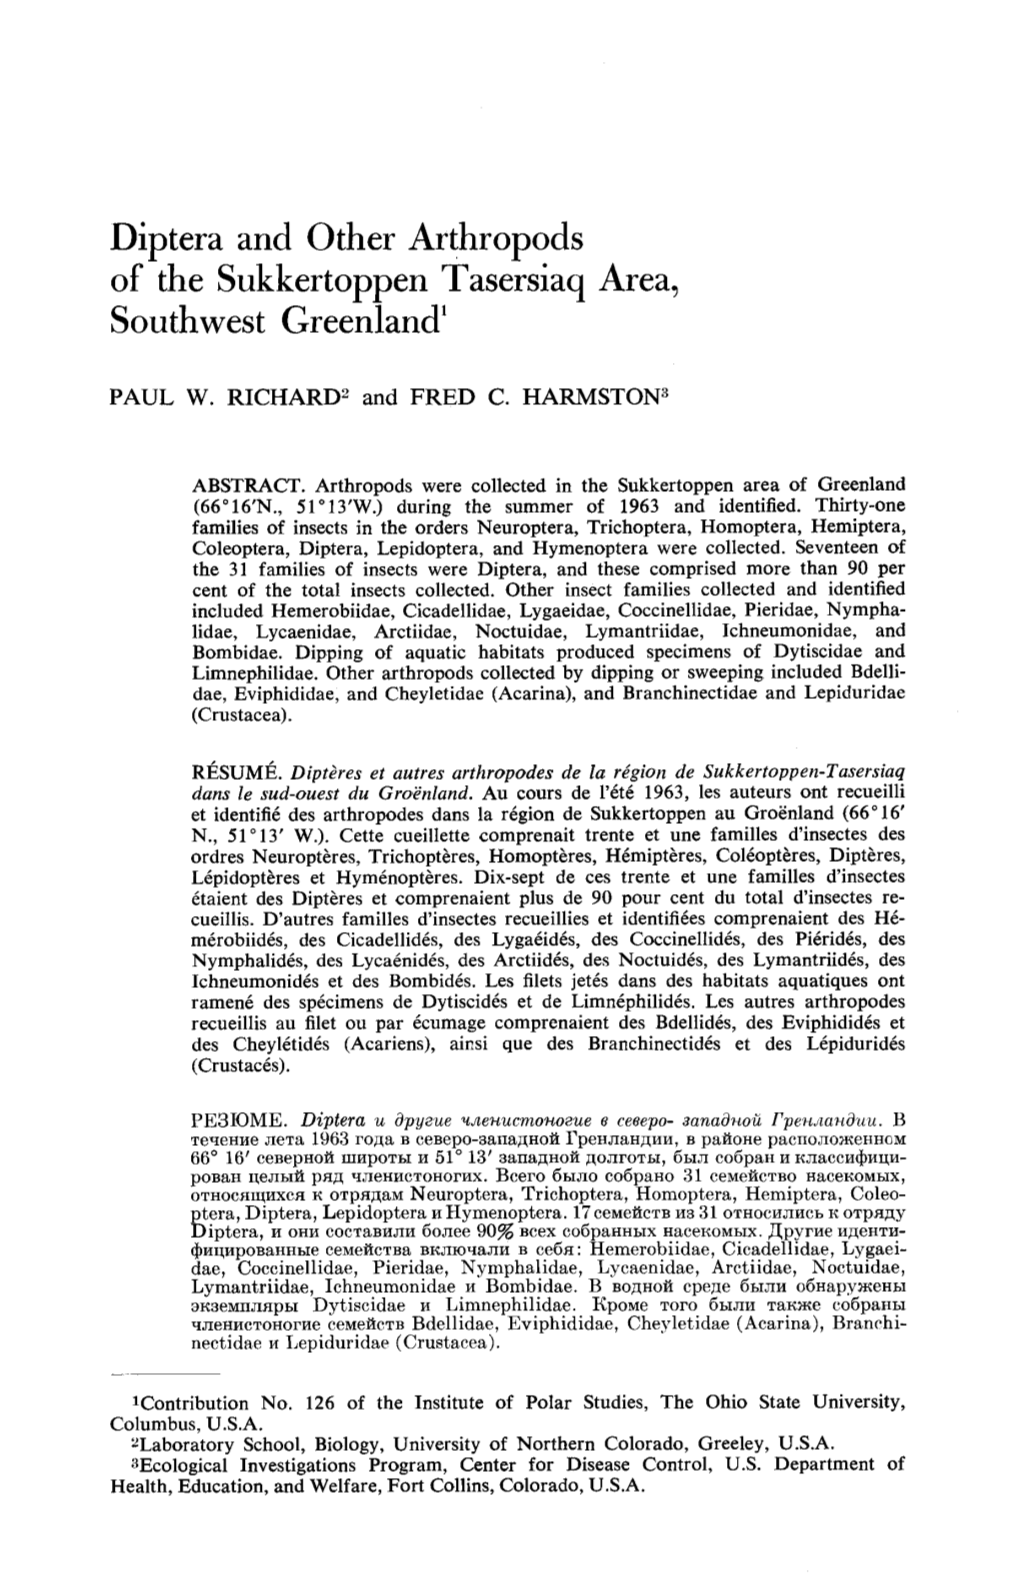 Diptera and Other Arthropods of the Sukkertoppen Tasersiaq Area, Southwest Greenland